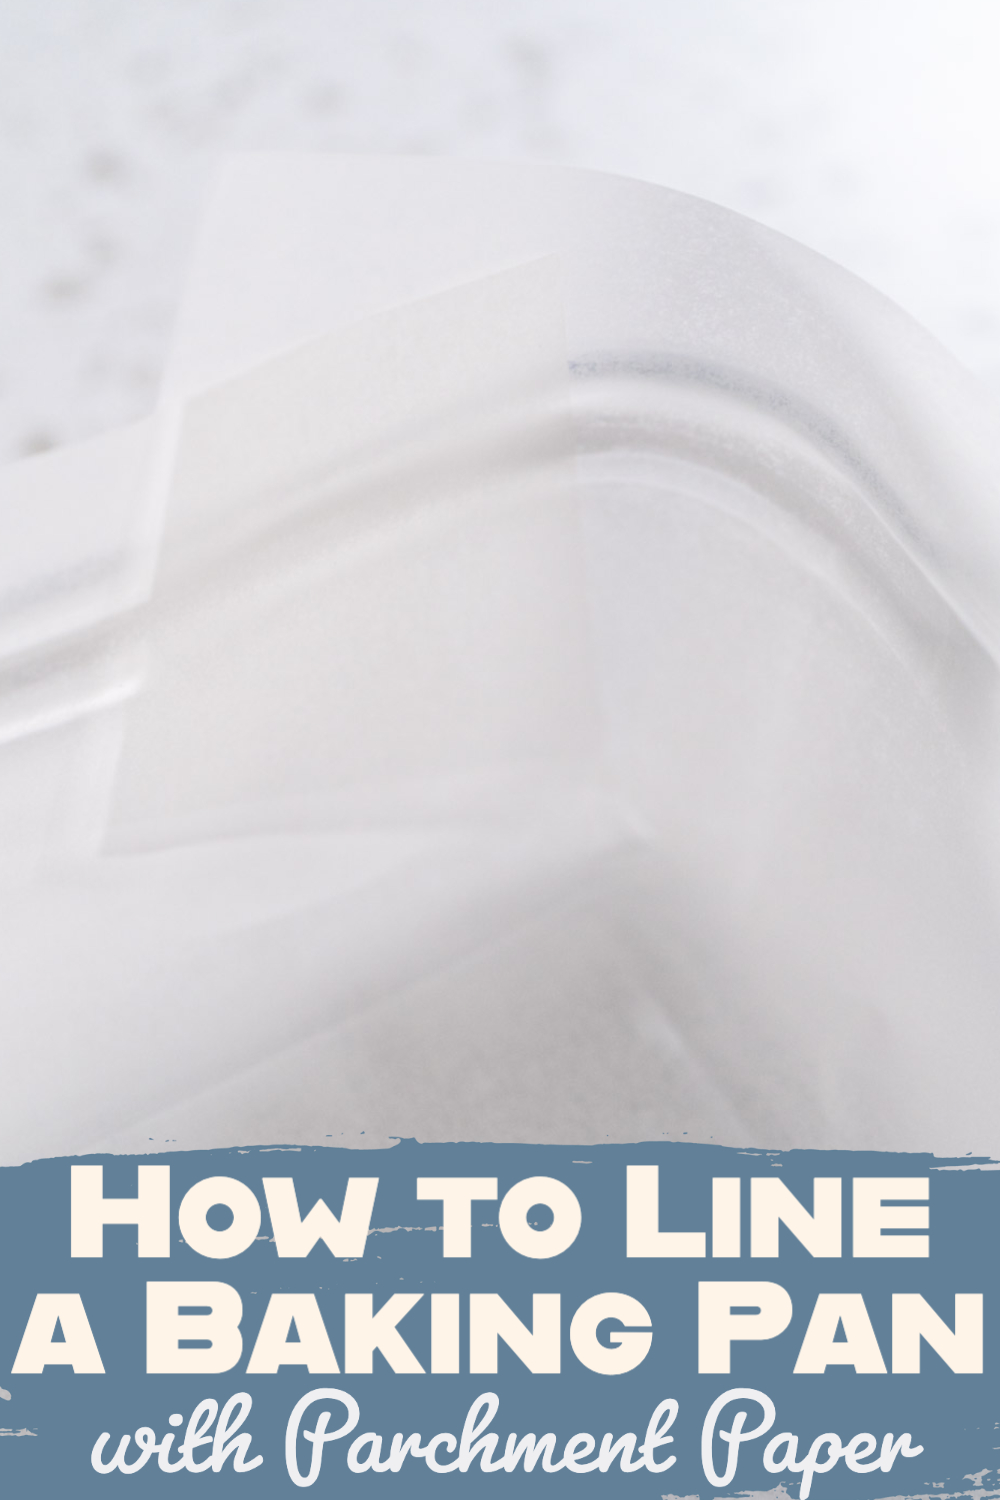 How to Line a Baking Pan with Parchment Paper